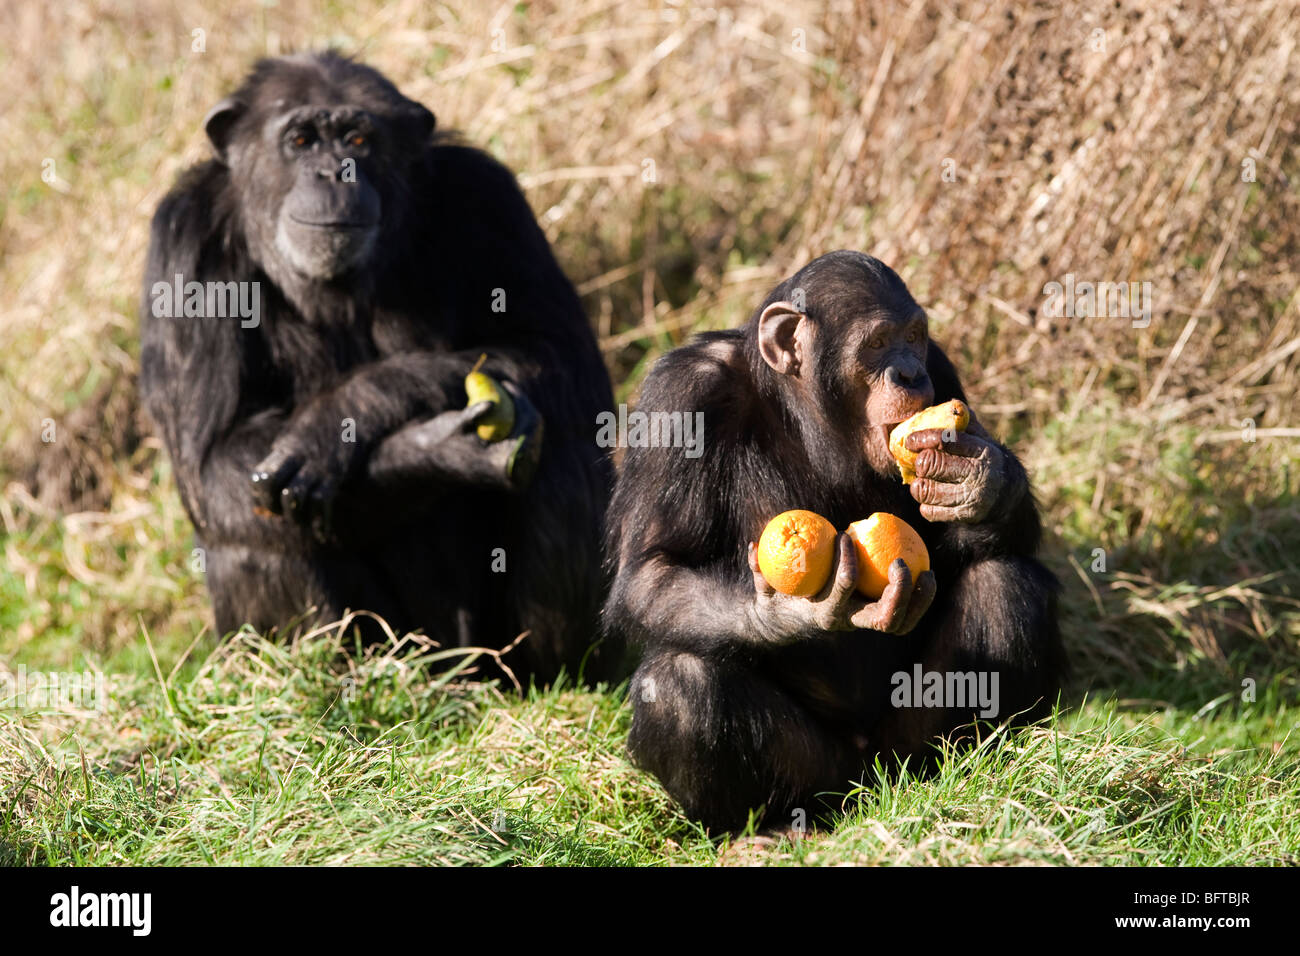 Chimpanzees at ZSL's Whipsnade Zoo in Bedfordshire, England Stock Photo